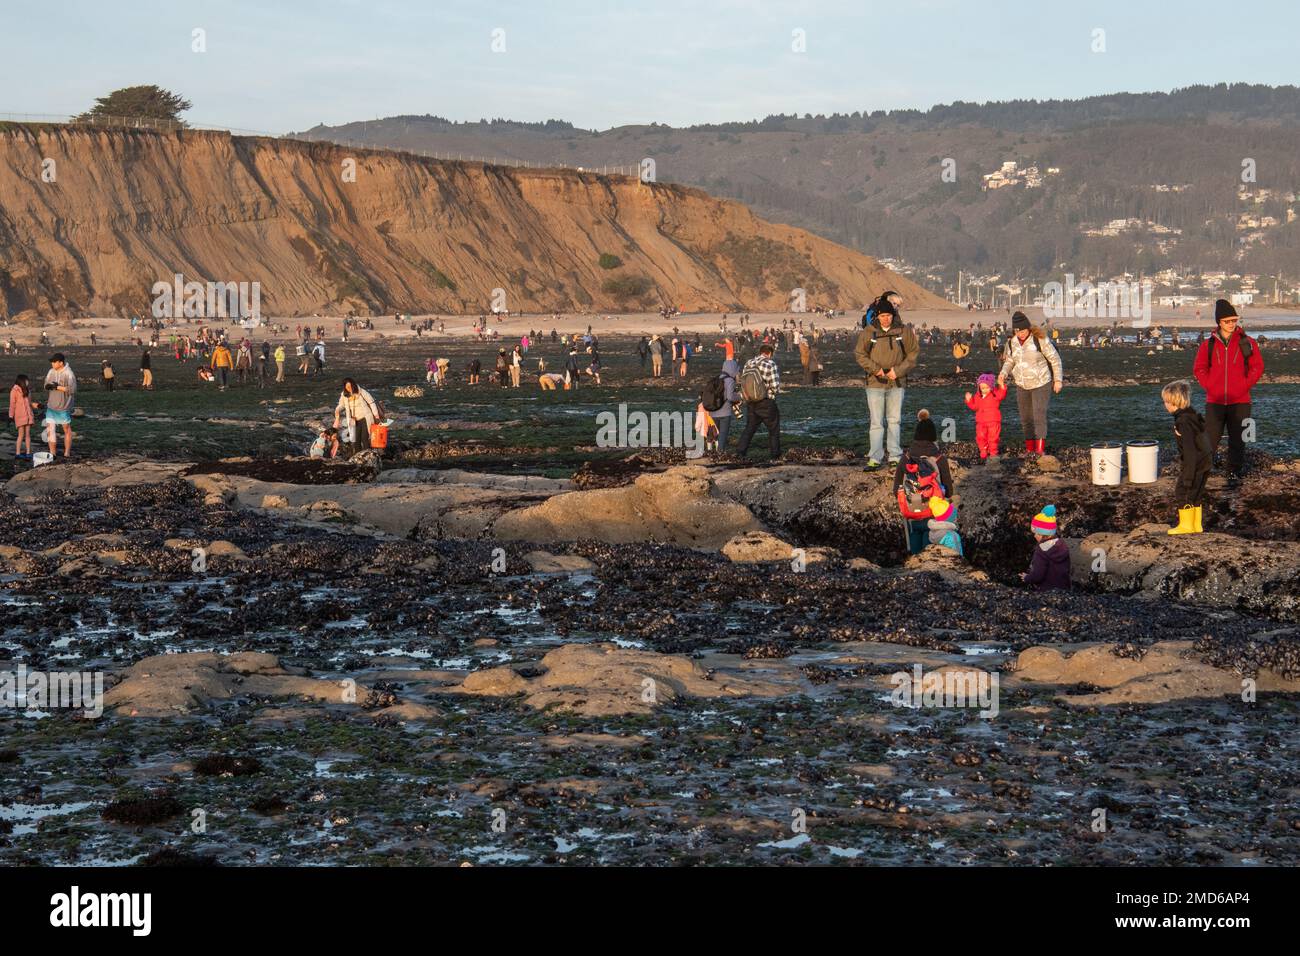 During the king tide in the San Francisco bay area crowds of people gather at Pillar Point to harvest mussels & other marine life. Stock Photo